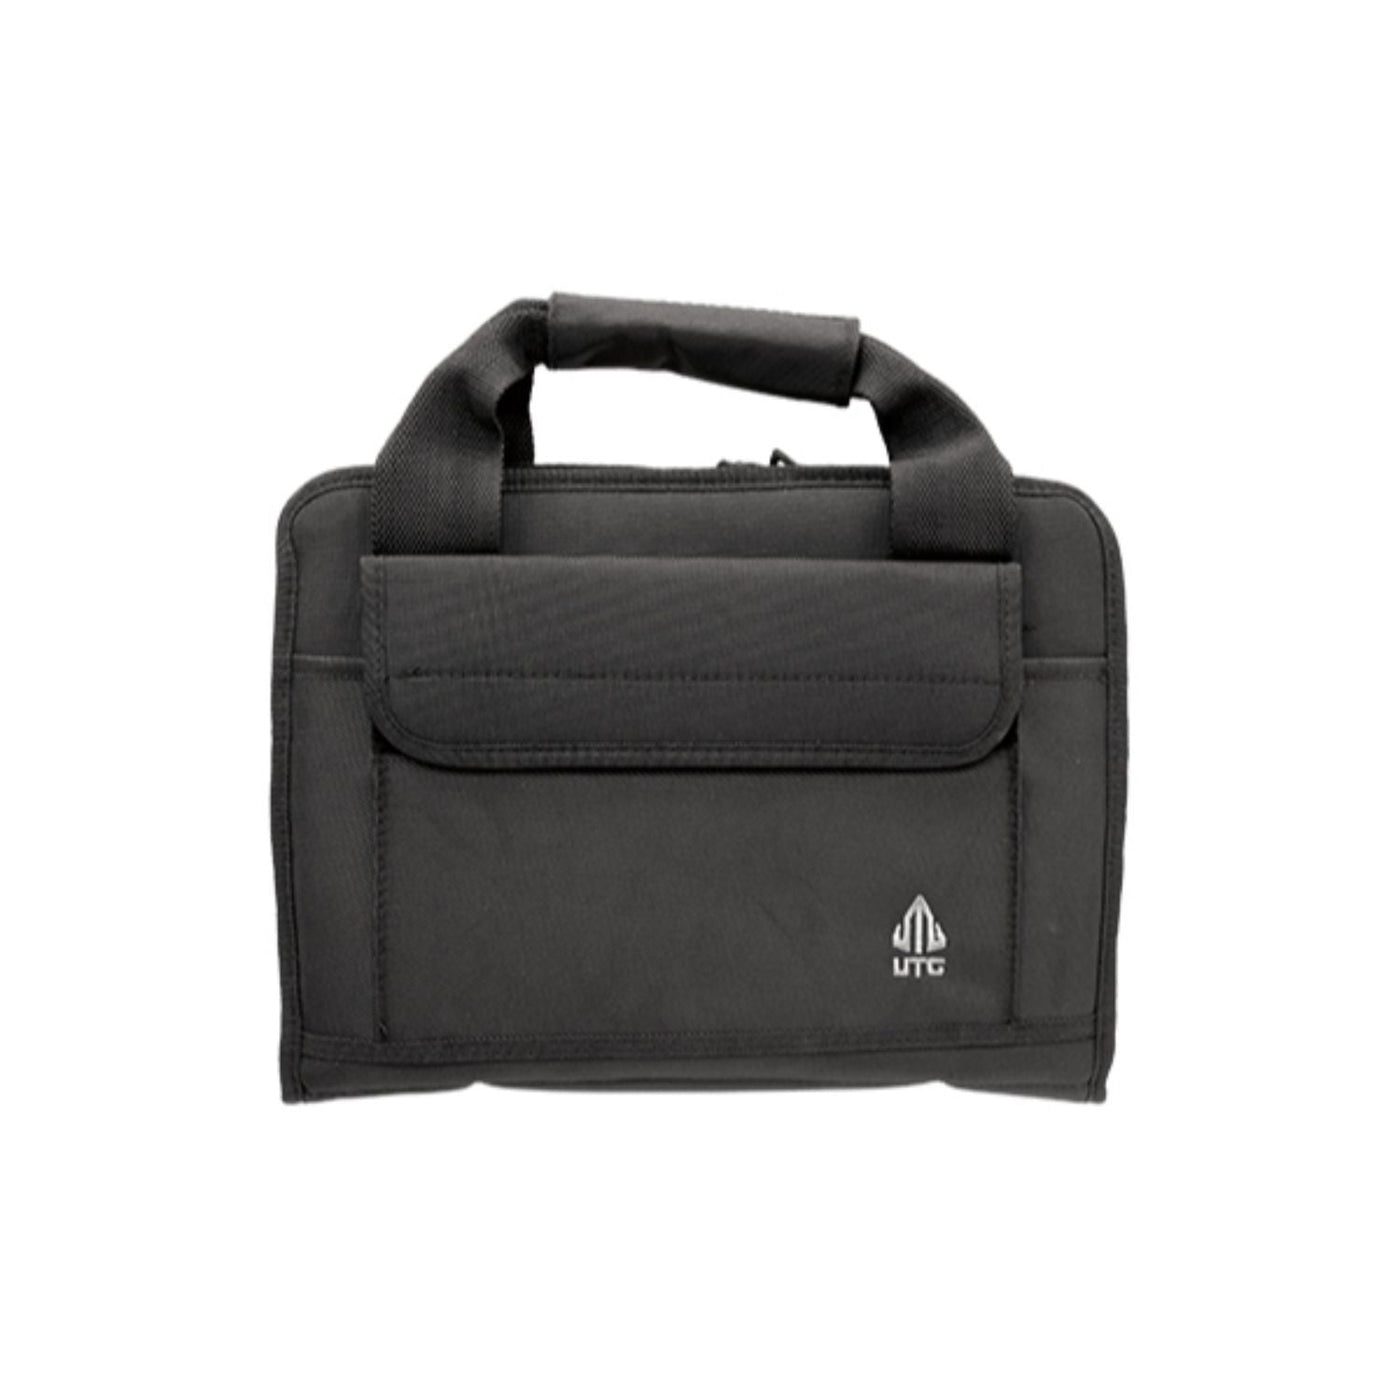 Leapers Leapers UTG Deluxe Double Pistol Case-Black Shooting